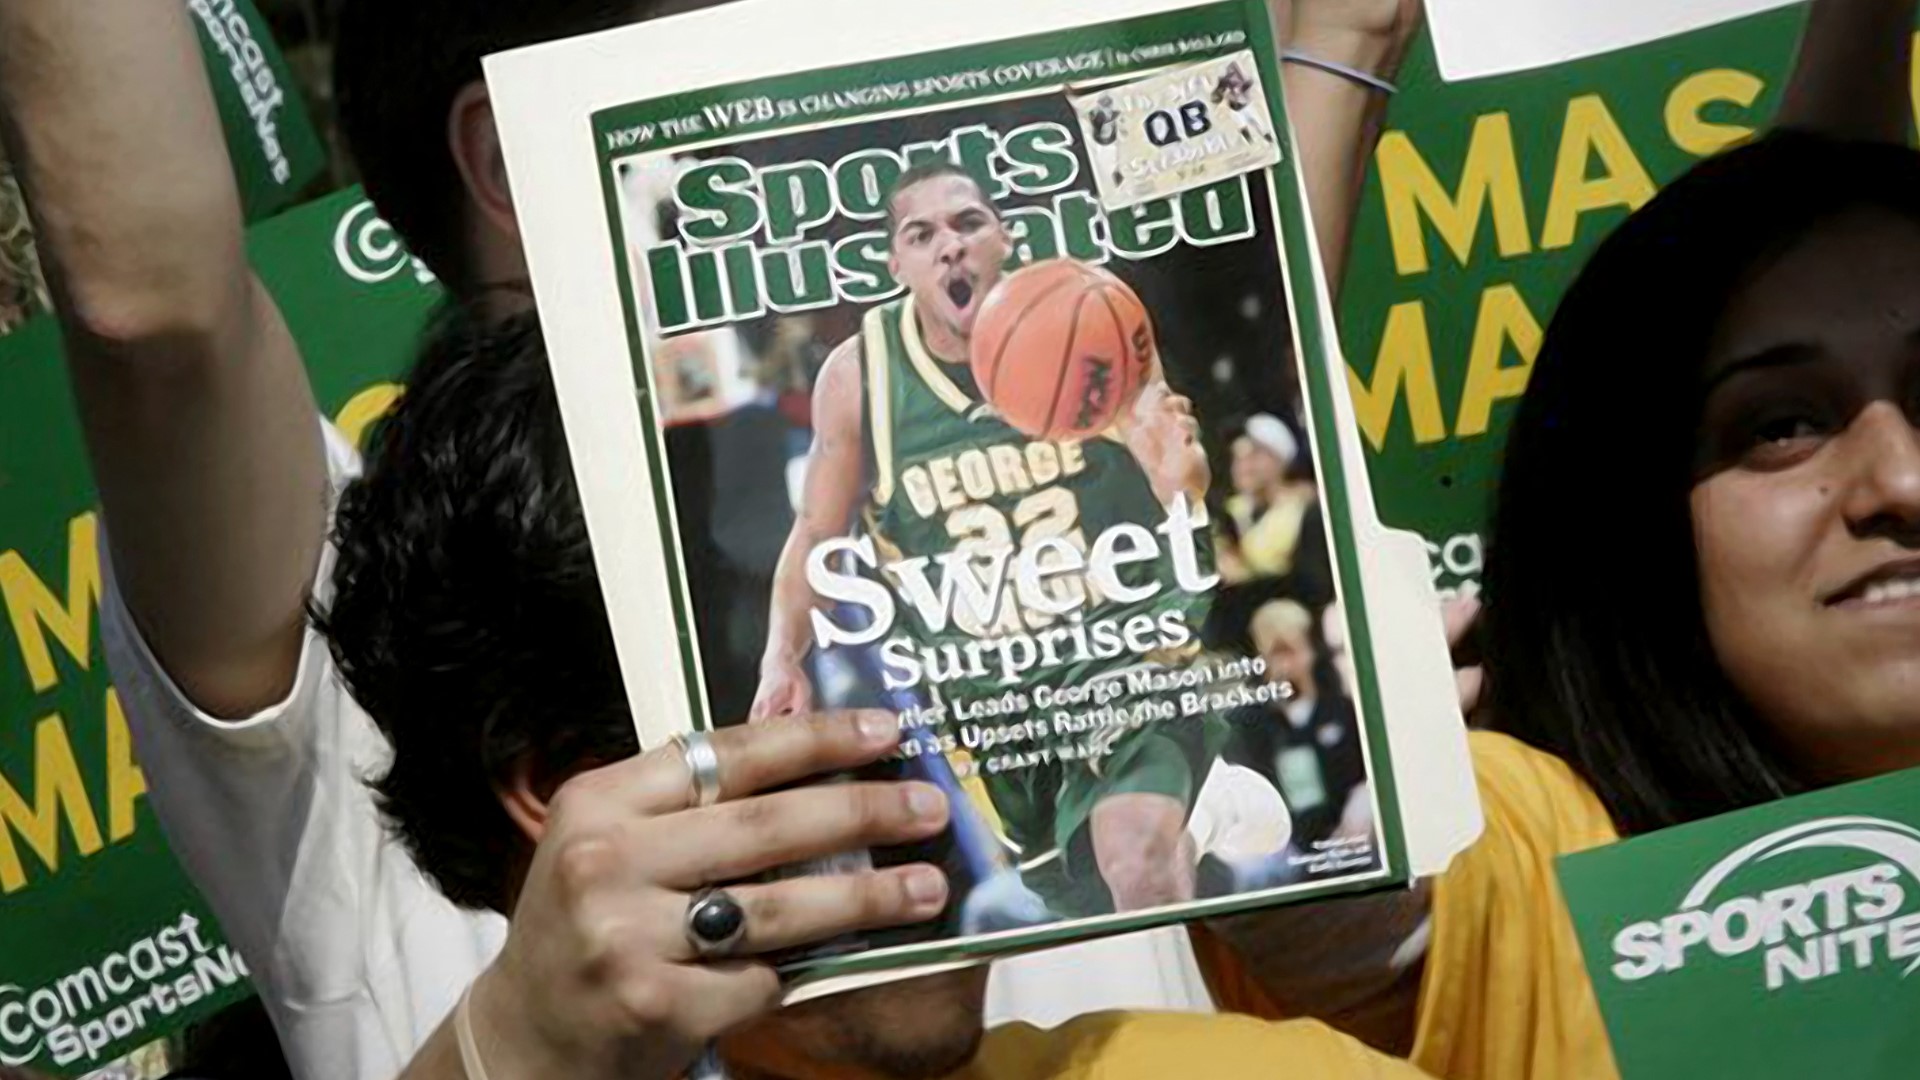 Sports Illustrated’s employee union said in a statement that the layoffs would be a significant number and possibly all, of the NewsGuild workers represented.